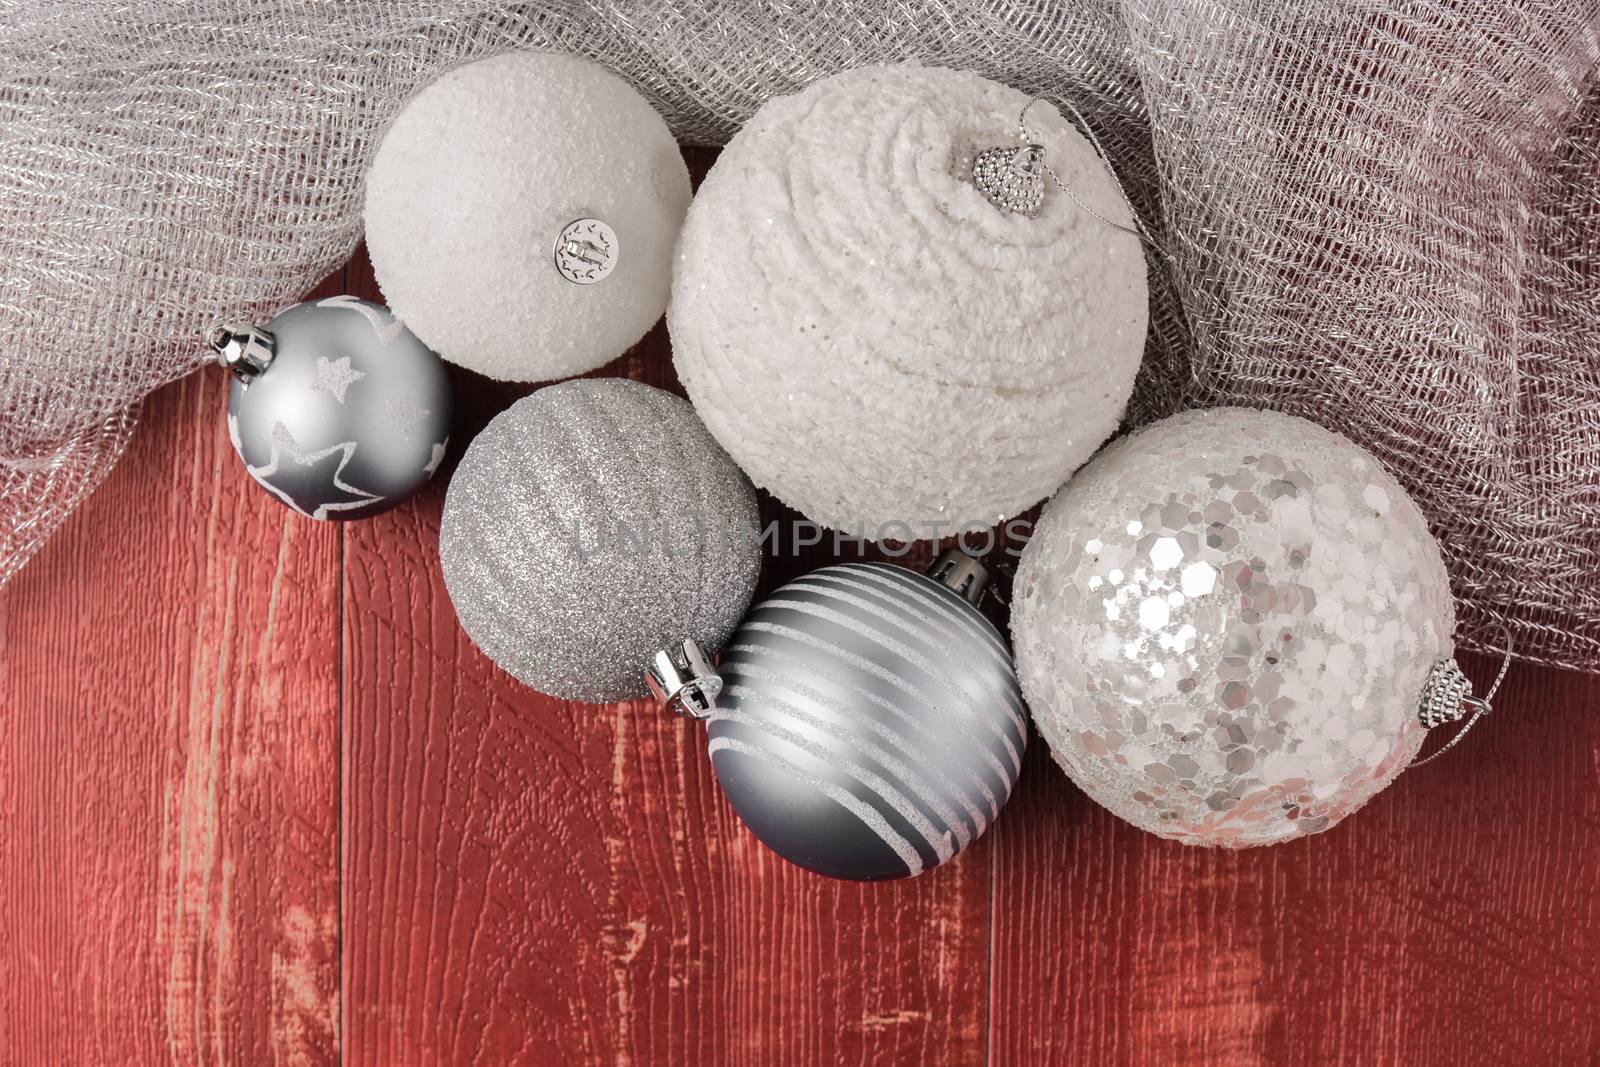 Festive glitter christmas balls decorations on rustic wooden table. Seasonal winter holidays. Top view with copy space